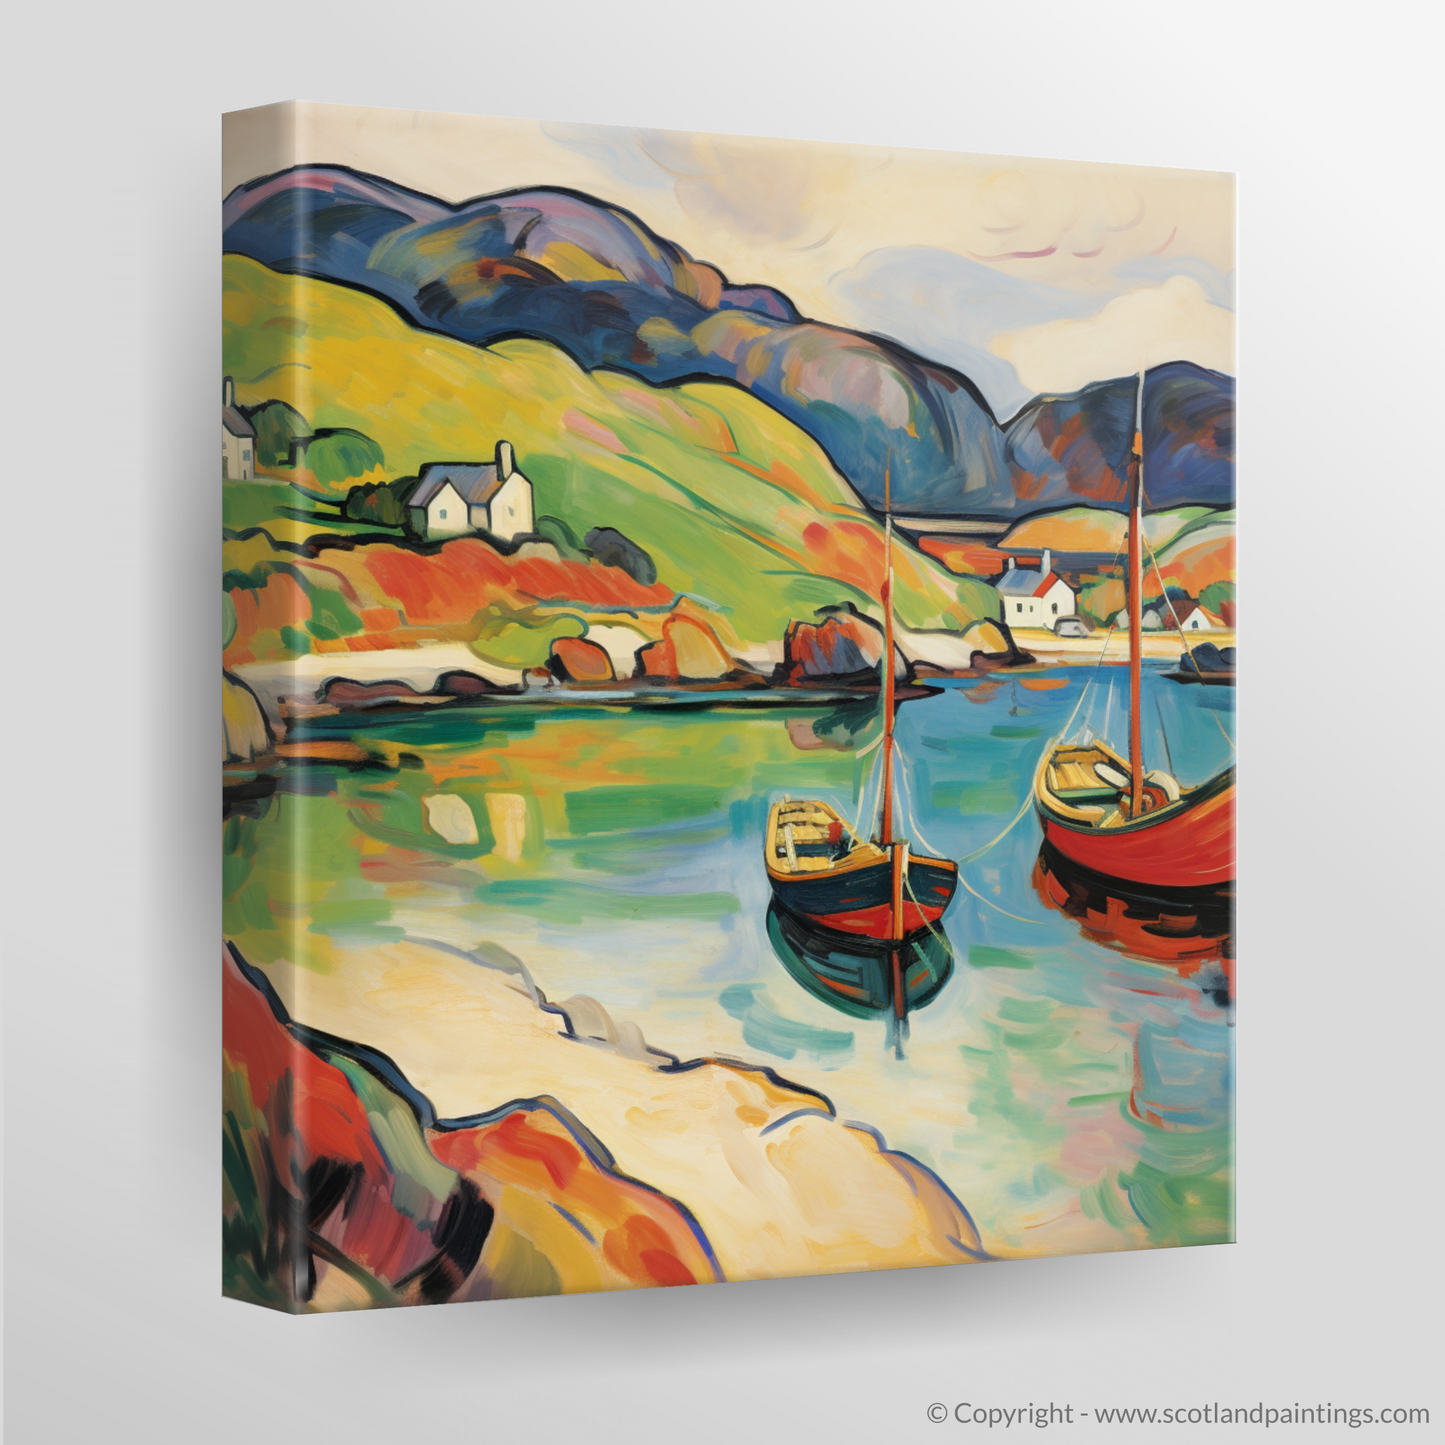 Gairloch Harbour: A Fauvist Dream in Wester Ross